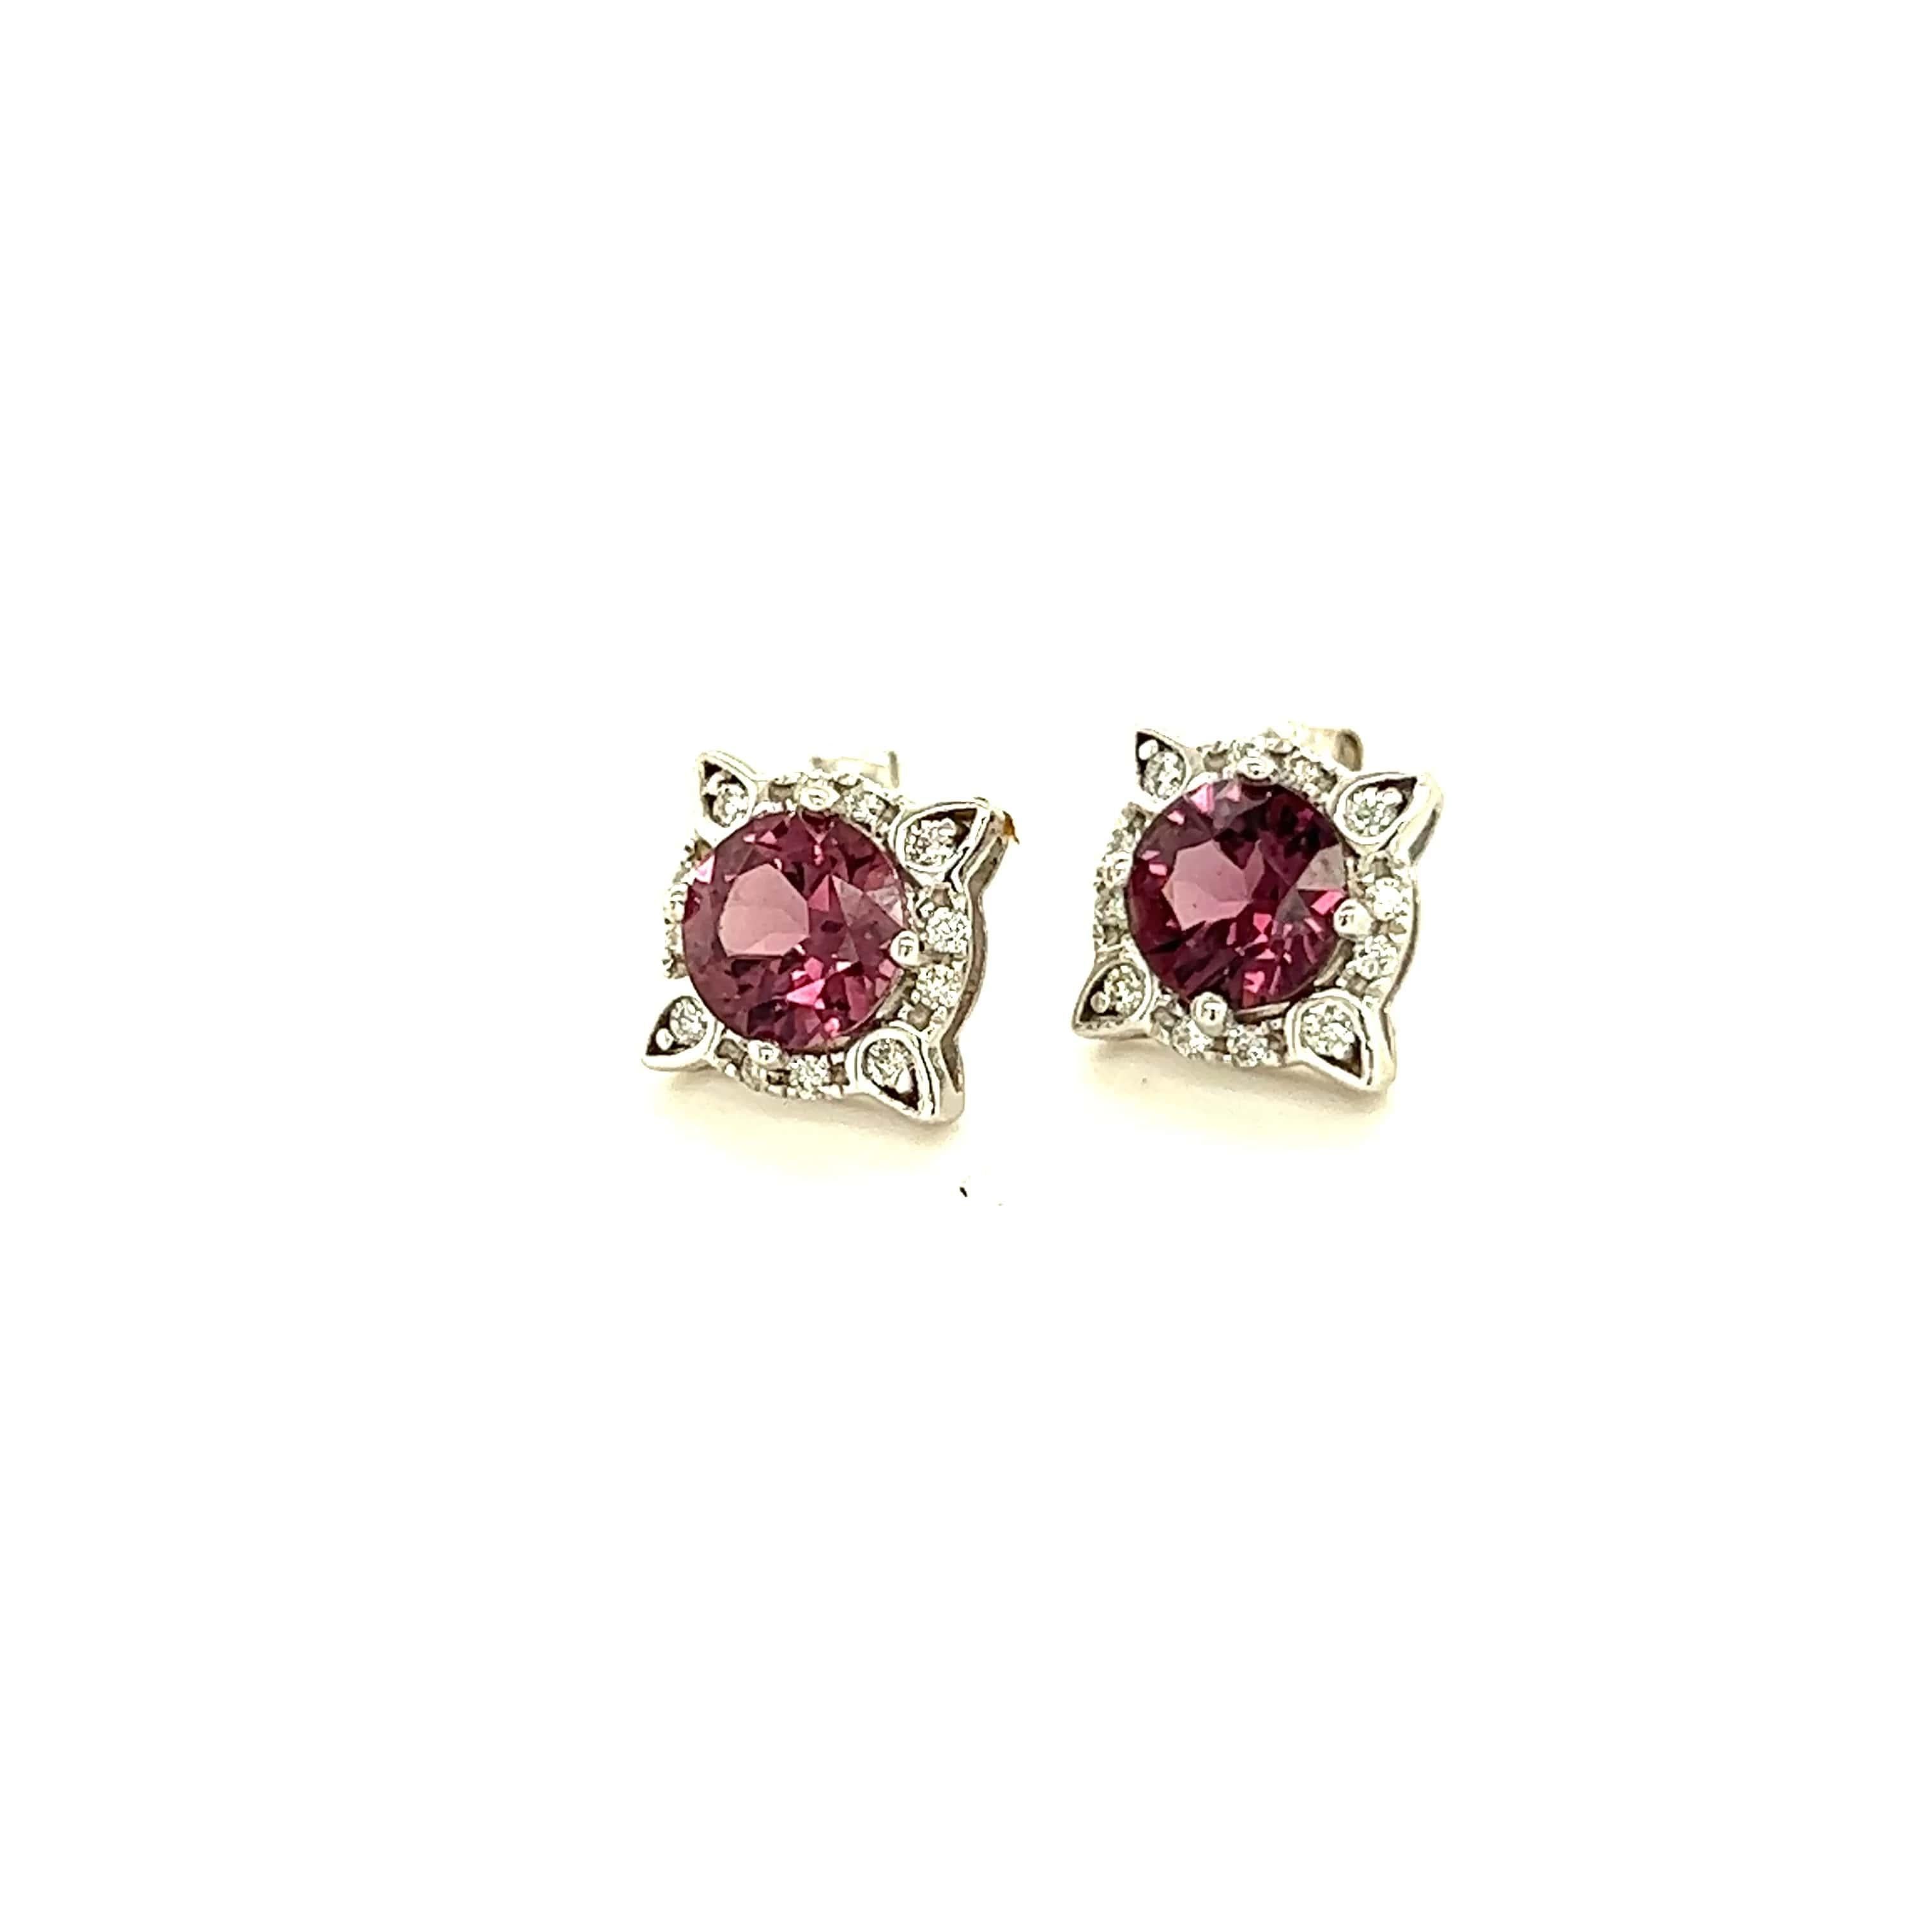 Natural Spinel Diamond Earrings 14k Y Gold 2.04 TCW Certified  For Sale 1